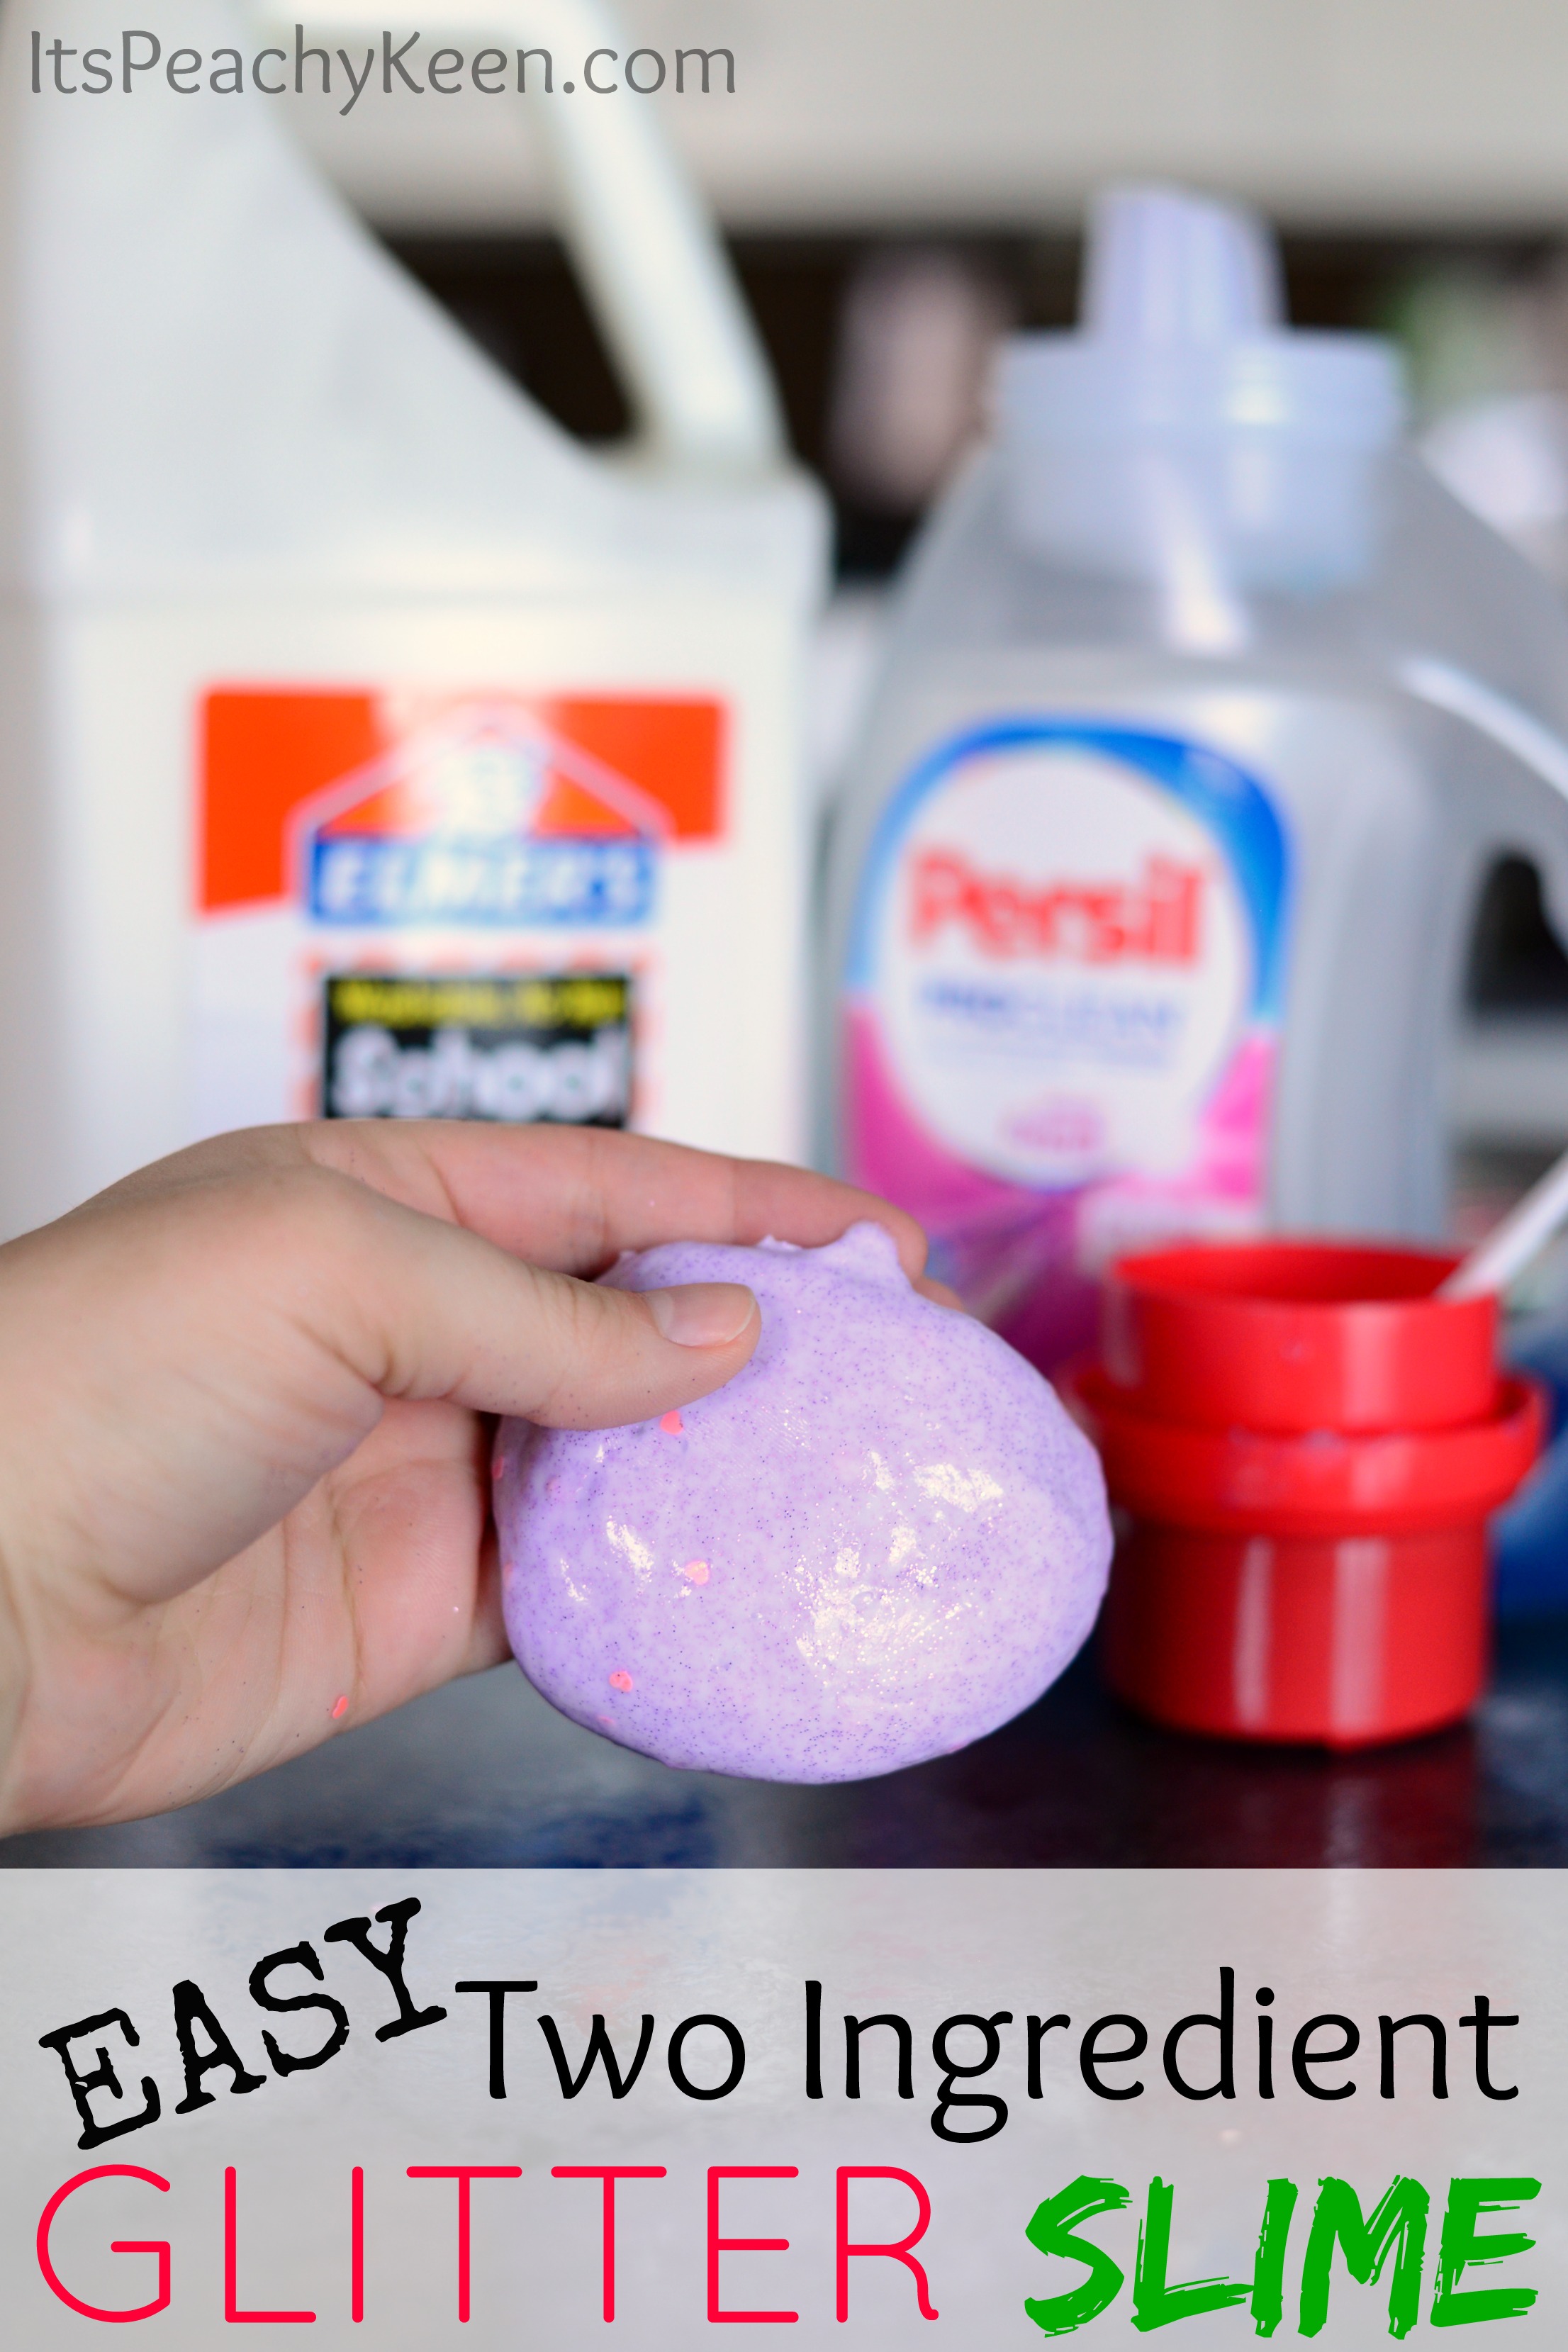 How To Make Slime With Elmer's Goes On Purple Dries Clear Glue  For the  slime lovers, by far this has to be the hardest glue to make slime out of.  It